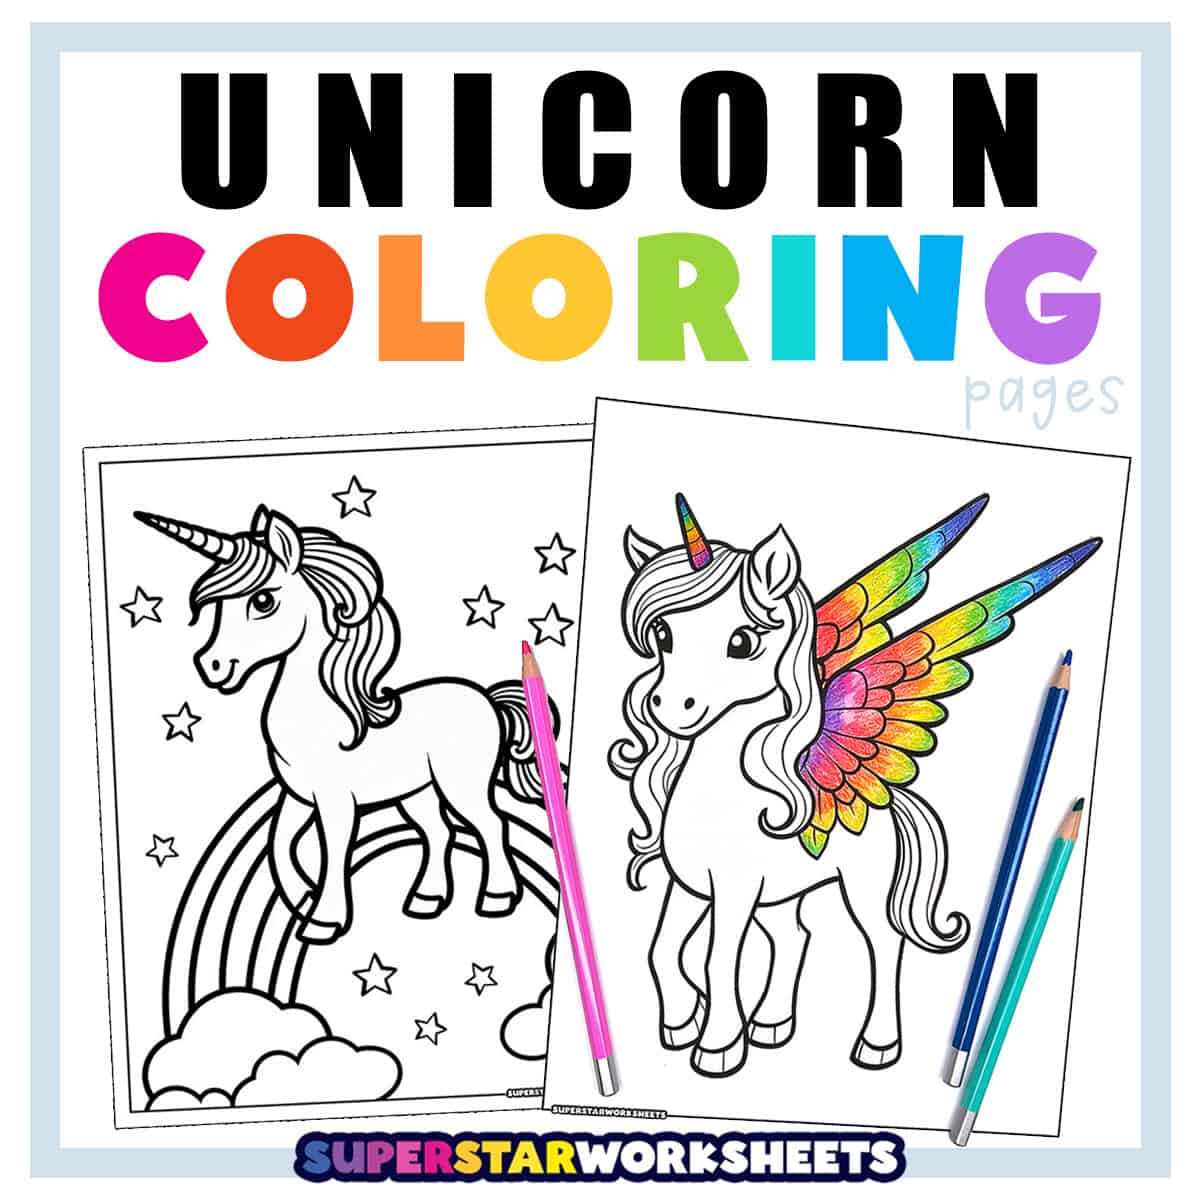 Free Printable Pencil Coloring Pages For Kids  Pencil crafts, Coloring  pages, Coloring pages for kids